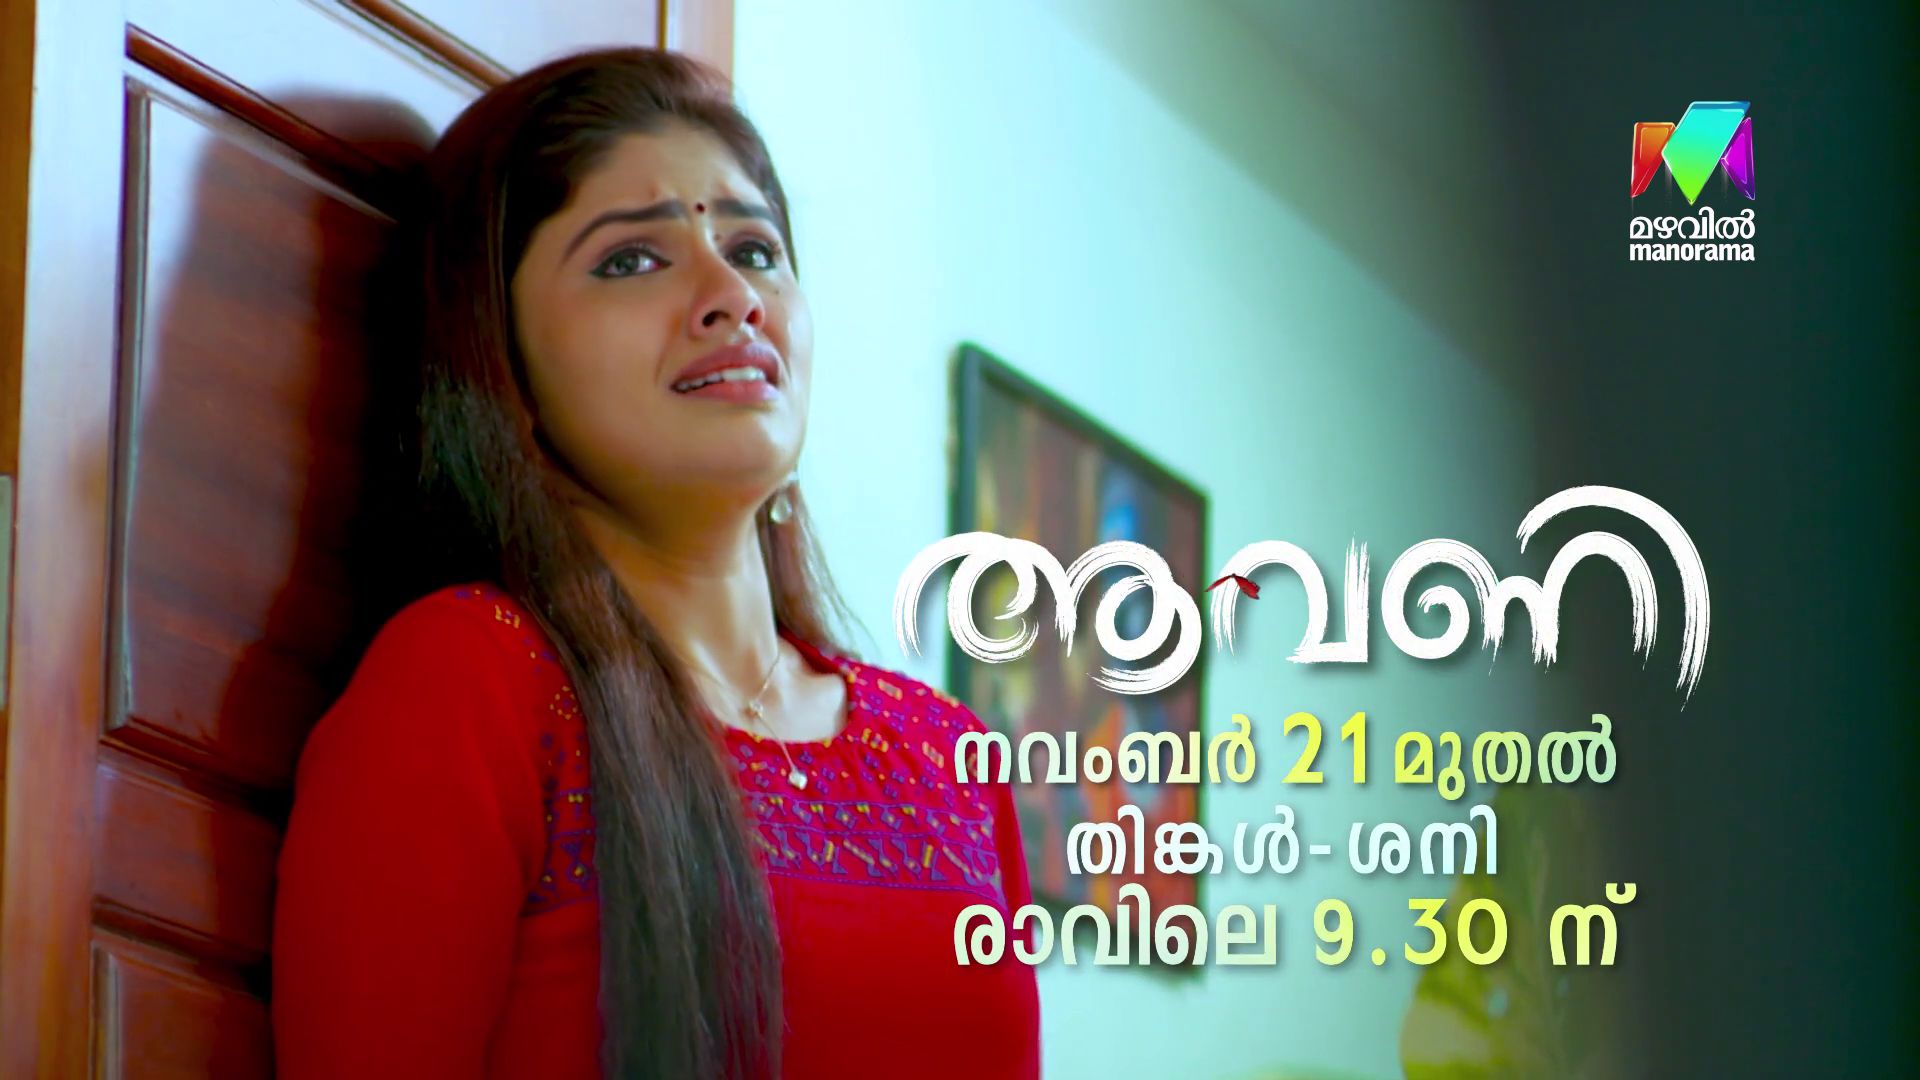 Makkal malayalam television serial coming soon on mazhavil manorama channel 14